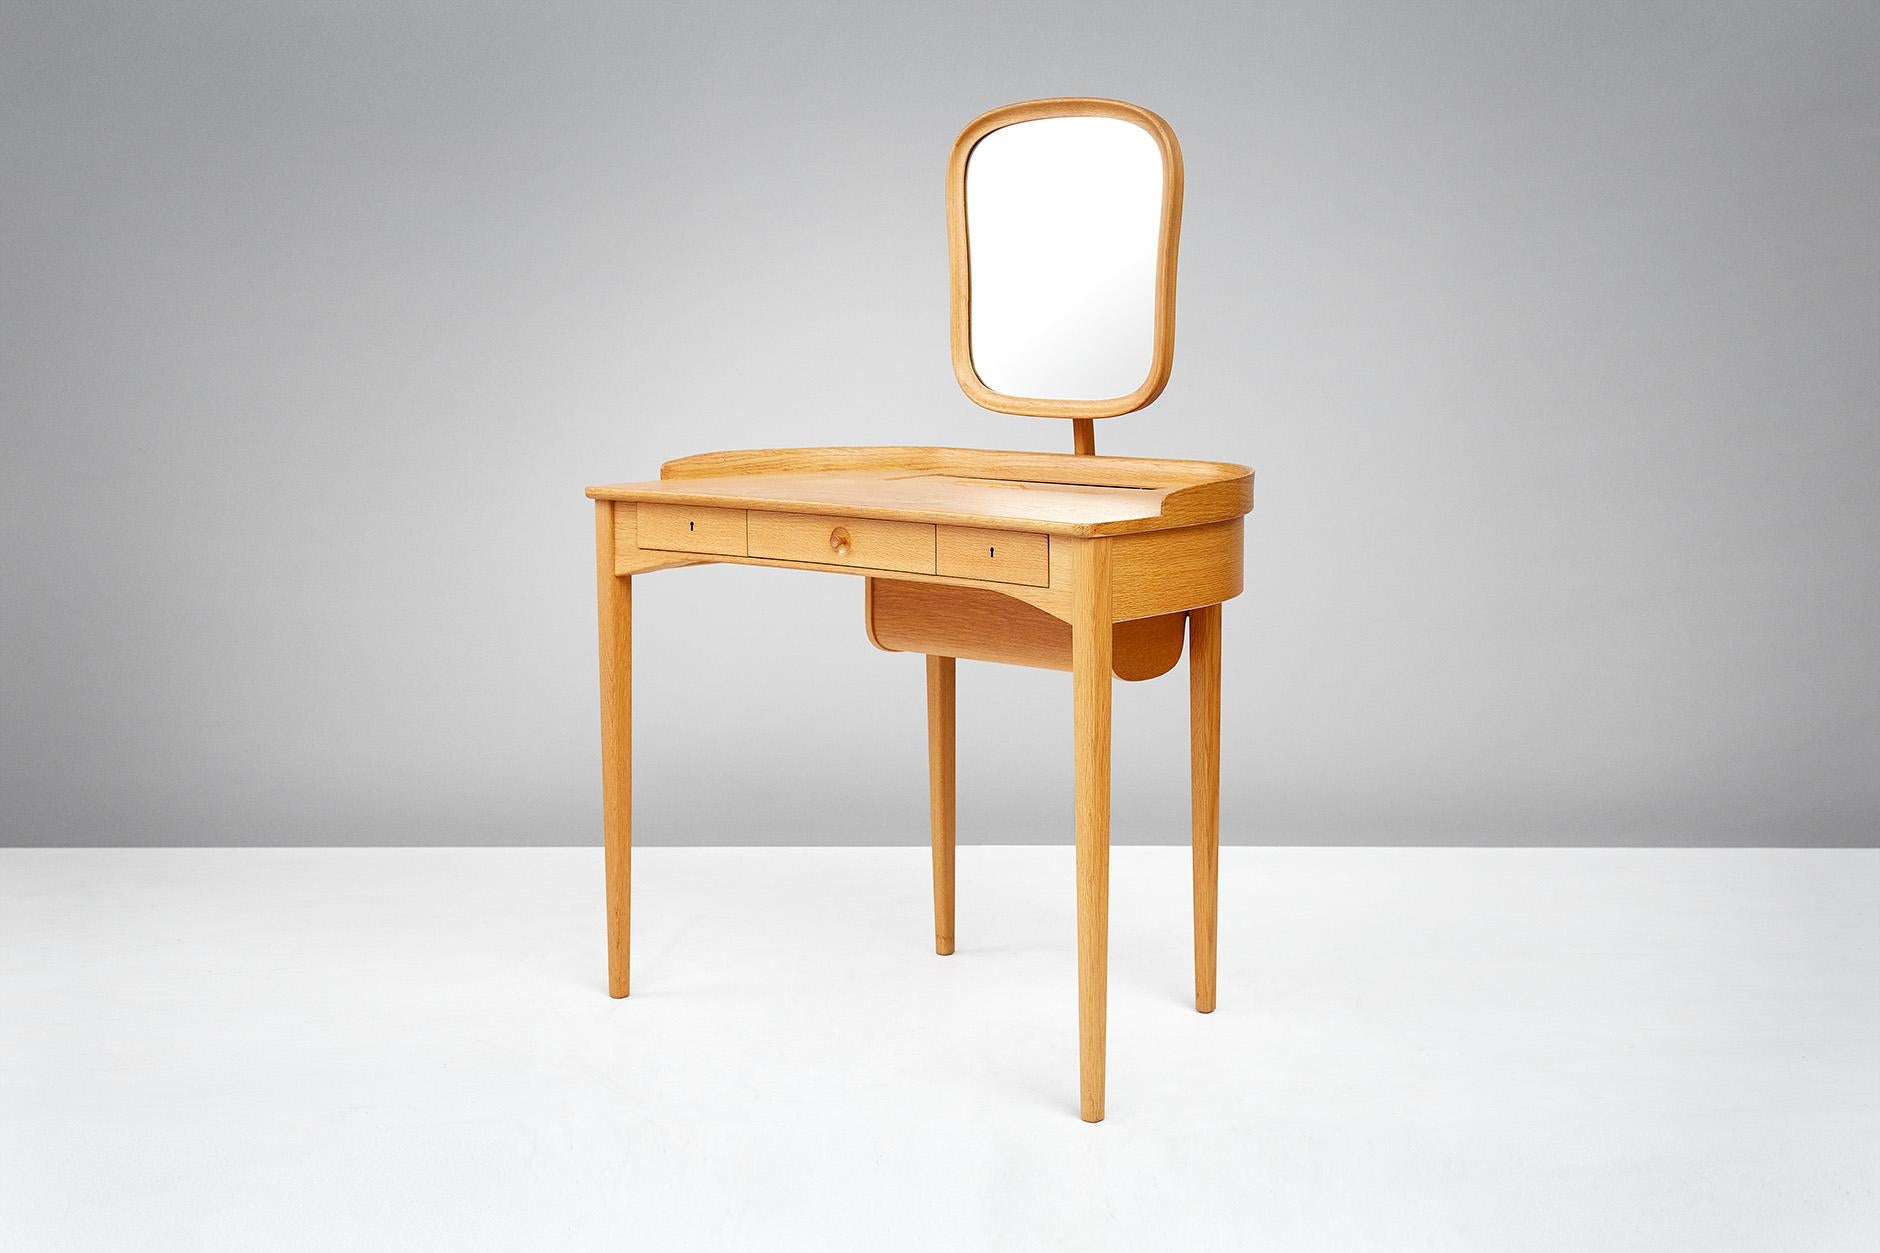 Carl Malmsten

Birgitta dressing table, 1964

Exquisite dressing table produced by Bodafors, Sweden in oak. Adjustable mirror with brass fittings, 3 front drawers with original keys. Additional storage in desk top with tambour door. Rarely seen